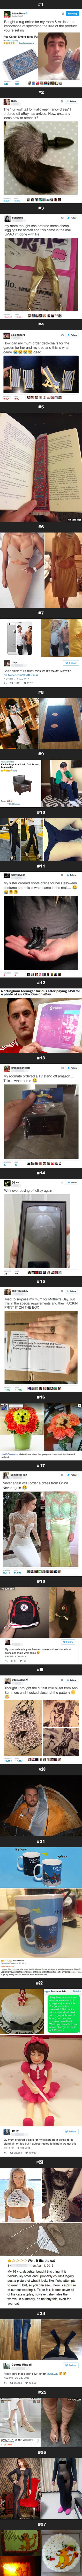 27 people who regretted doing their shopping online